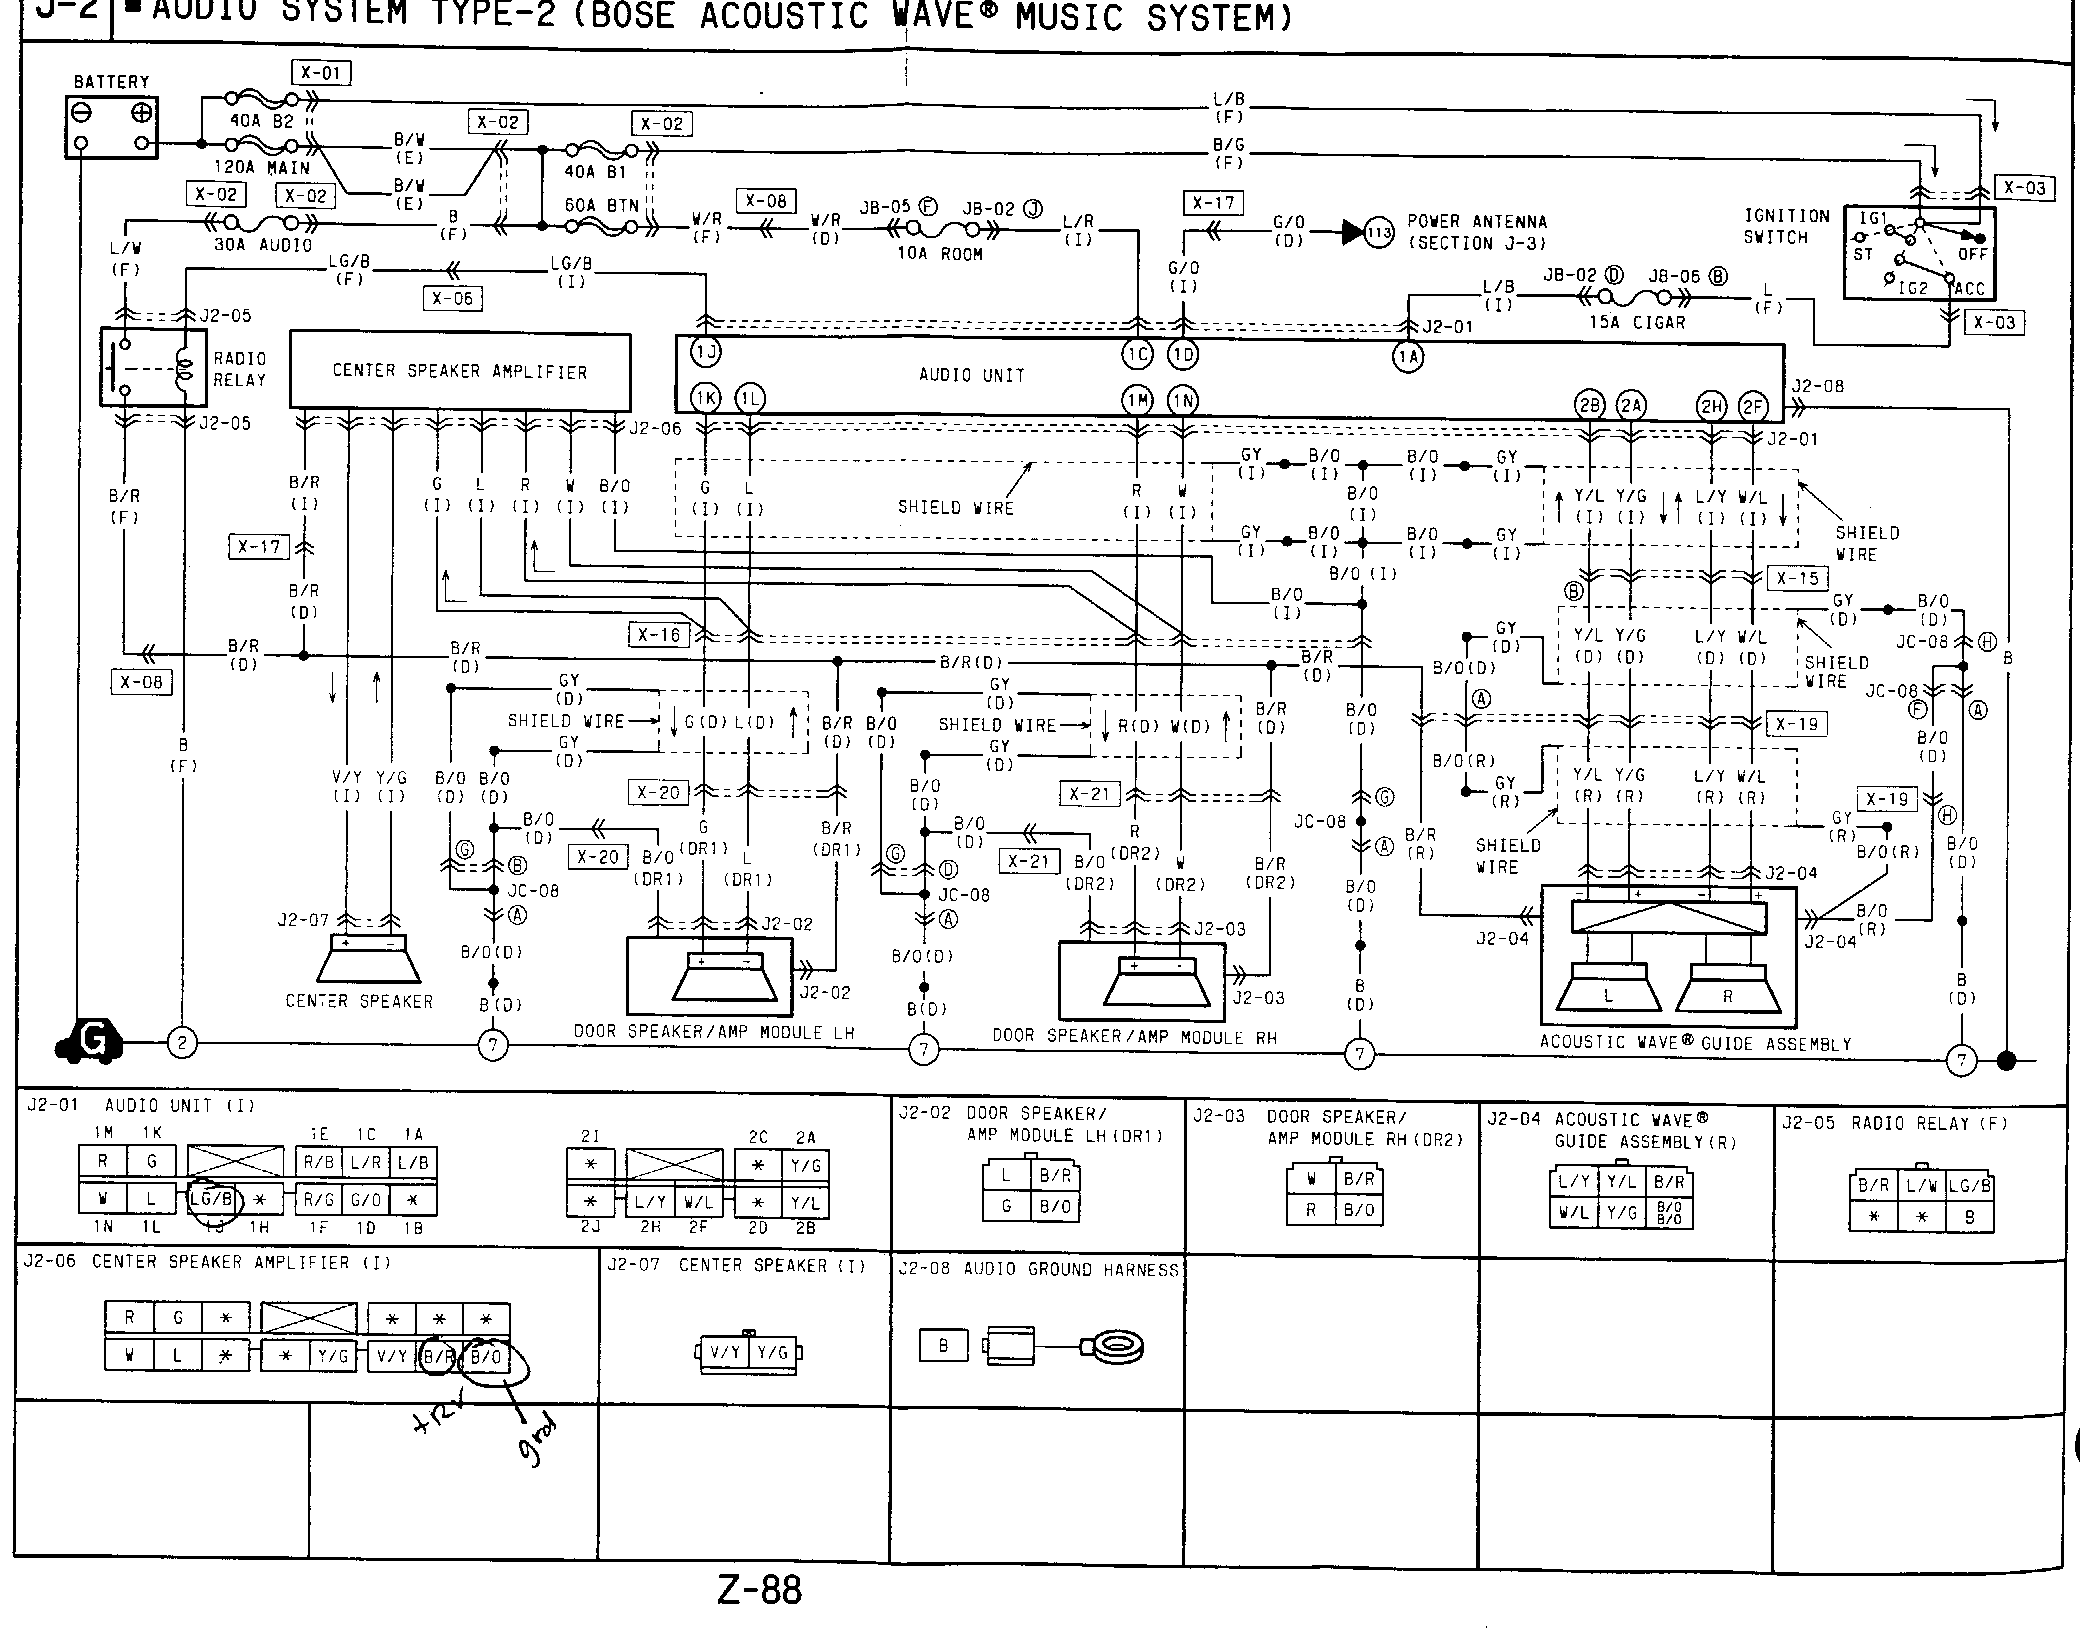 Wiring Schematic for Bose Stereo